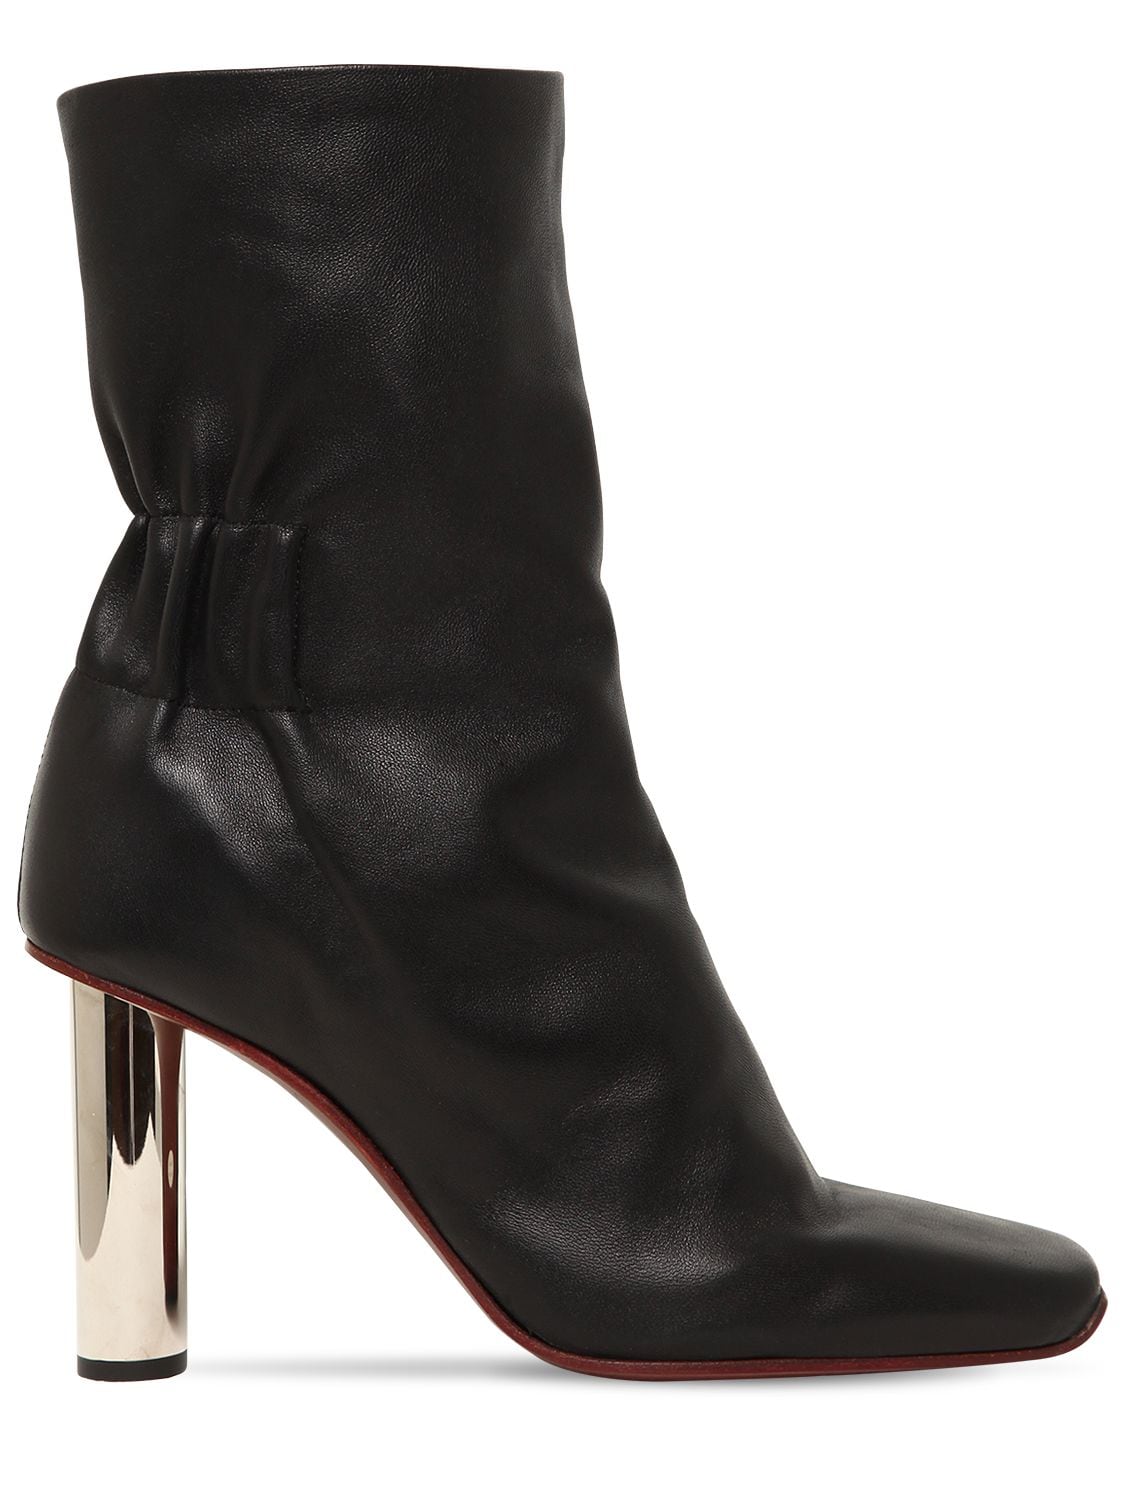 100mm Leather Ankle Boots W/ Metal Heel